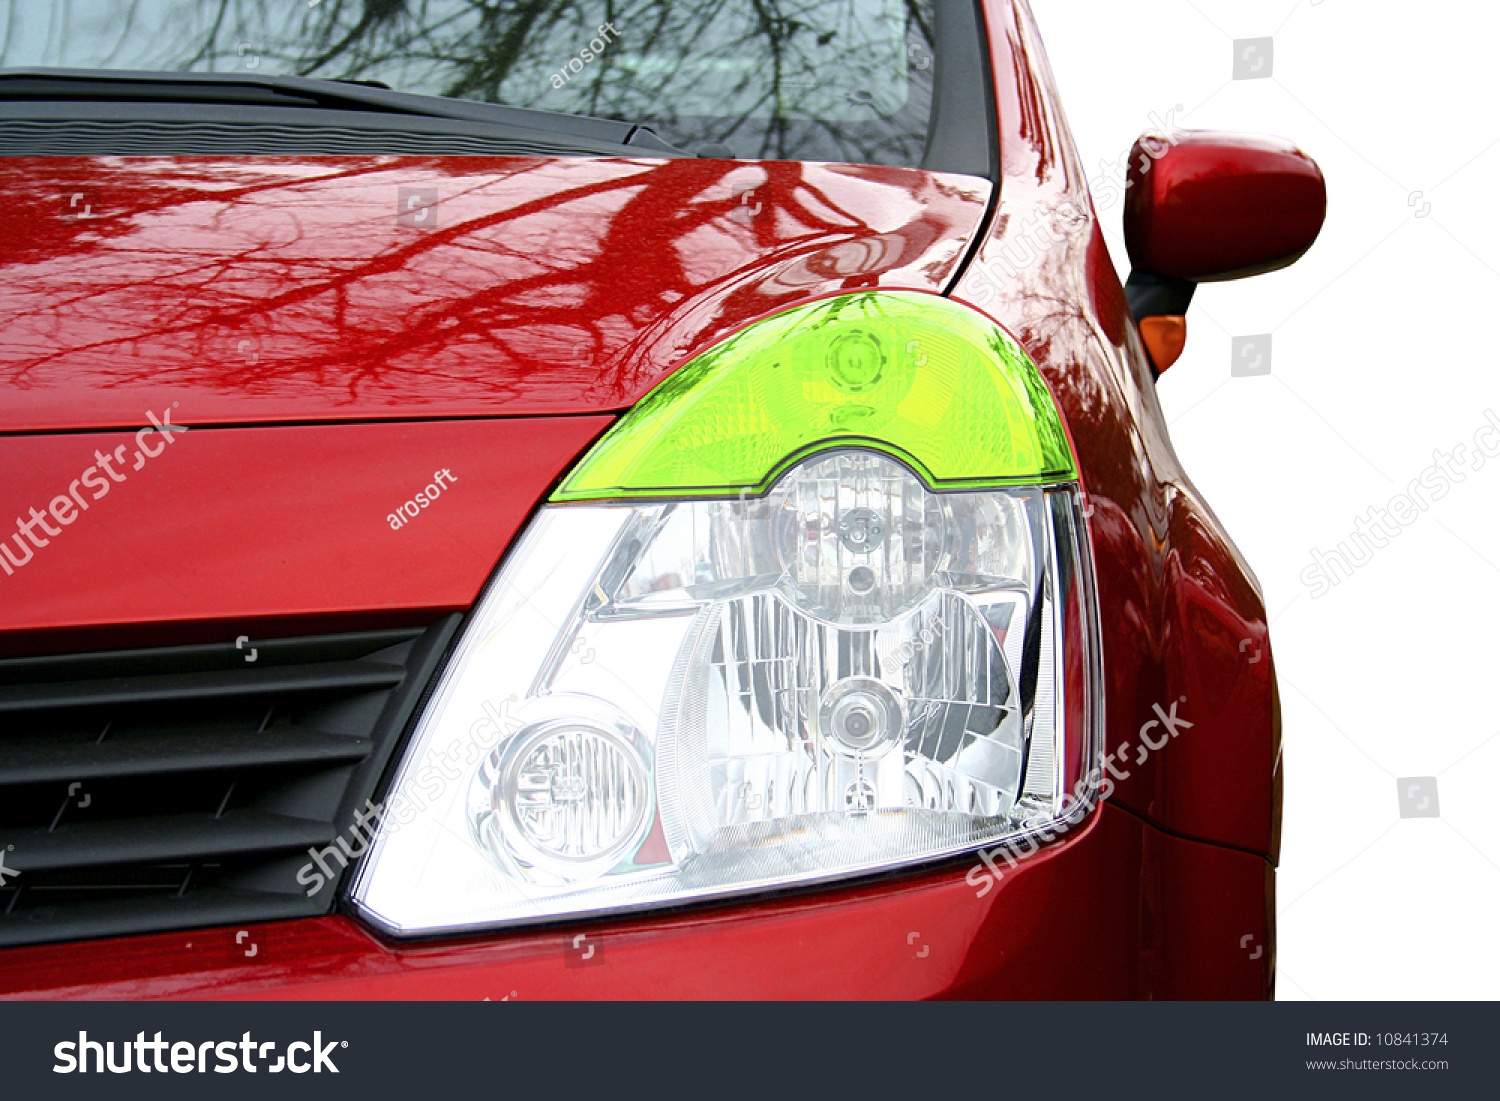 Beautiful Car. Great Color. Very Good Details. Stock Photo 10841374 : Shutterstock